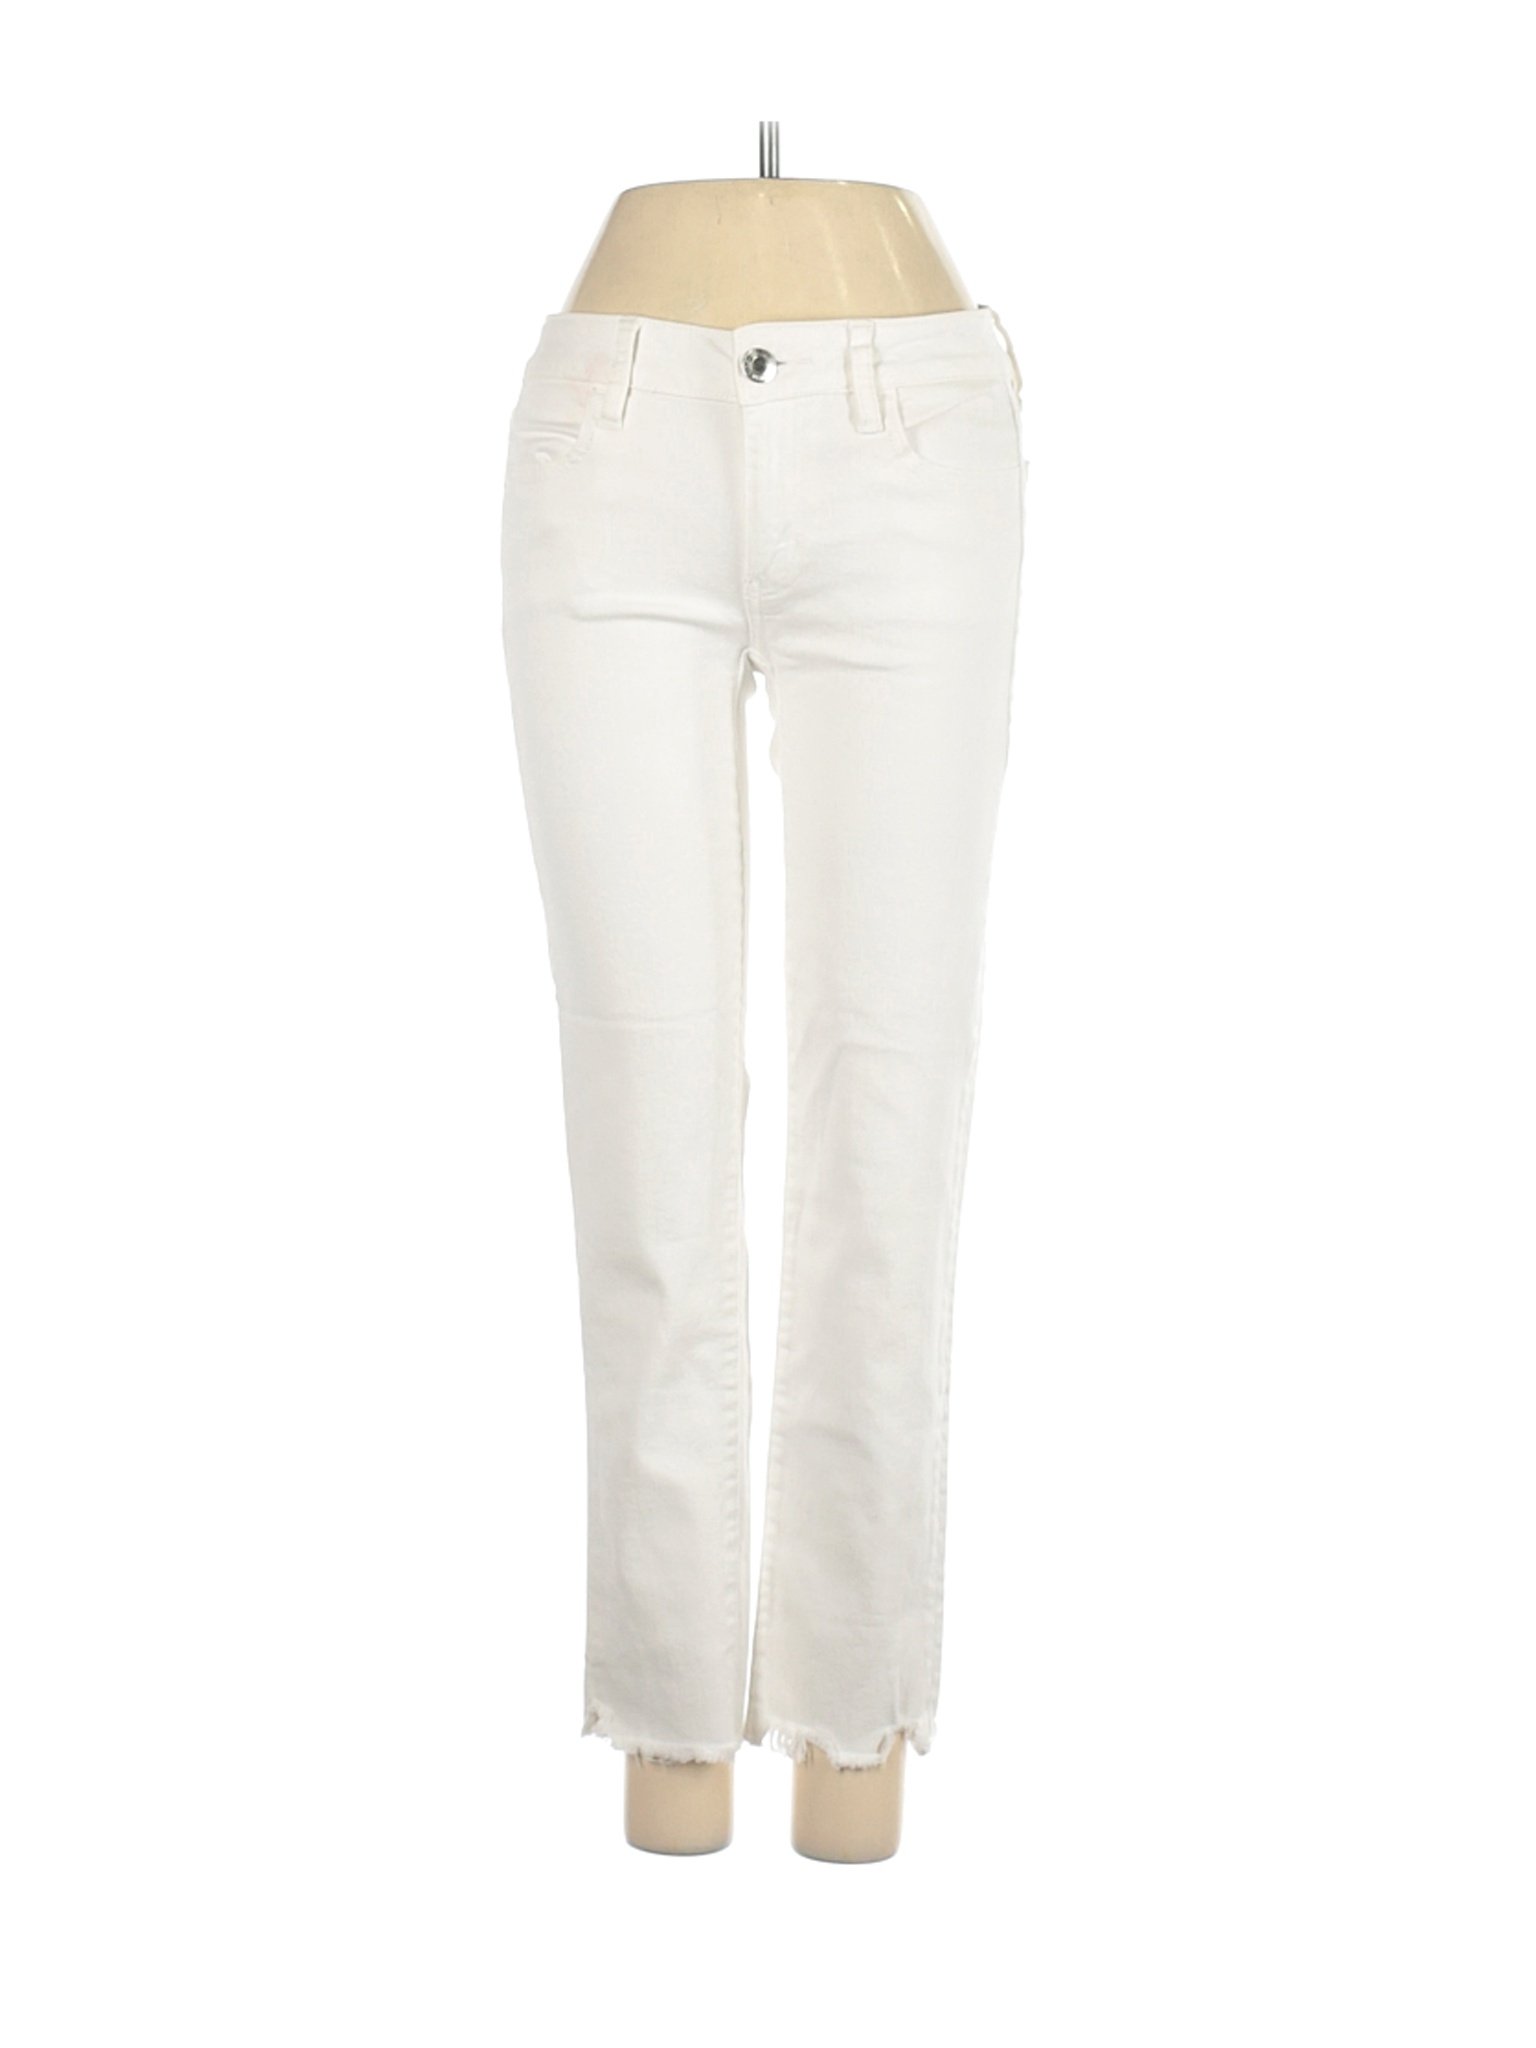 American Eagle Outfitters Women White Jeans 0 | eBay